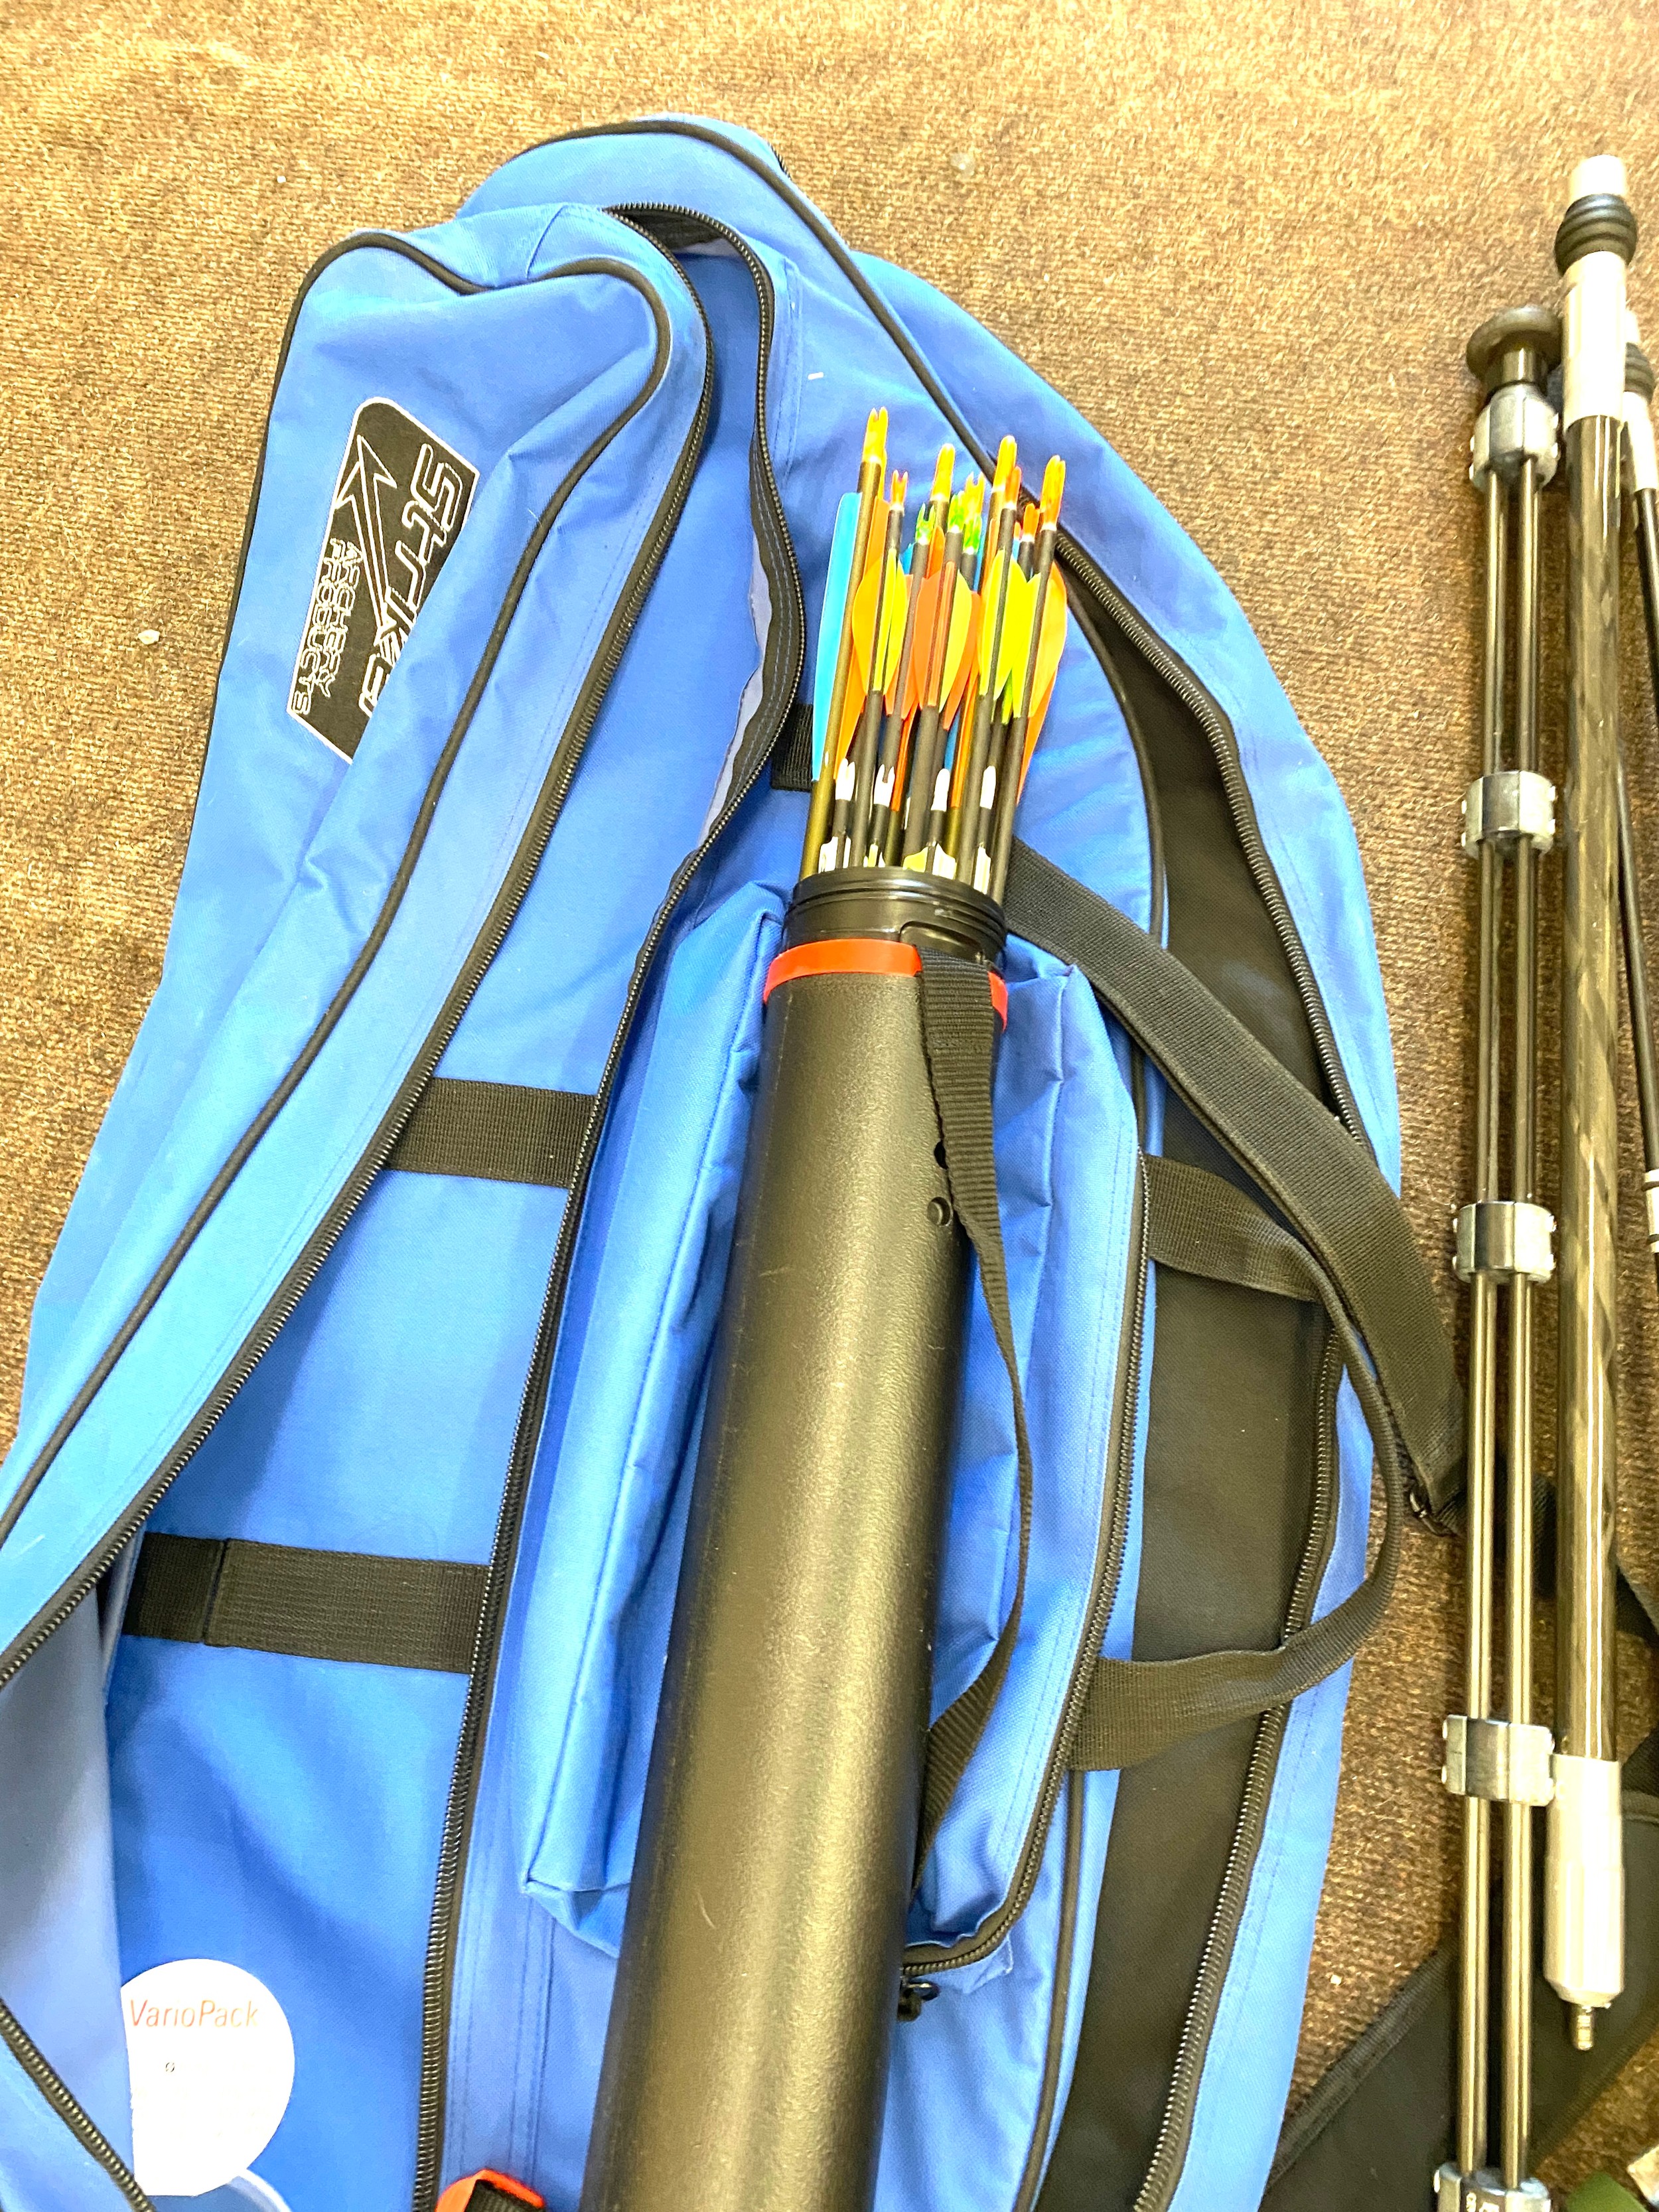 Bean HH Compound bow, C/W sights, balanse nods, arrows 40lbs draw weight, with case and signets - Image 5 of 5